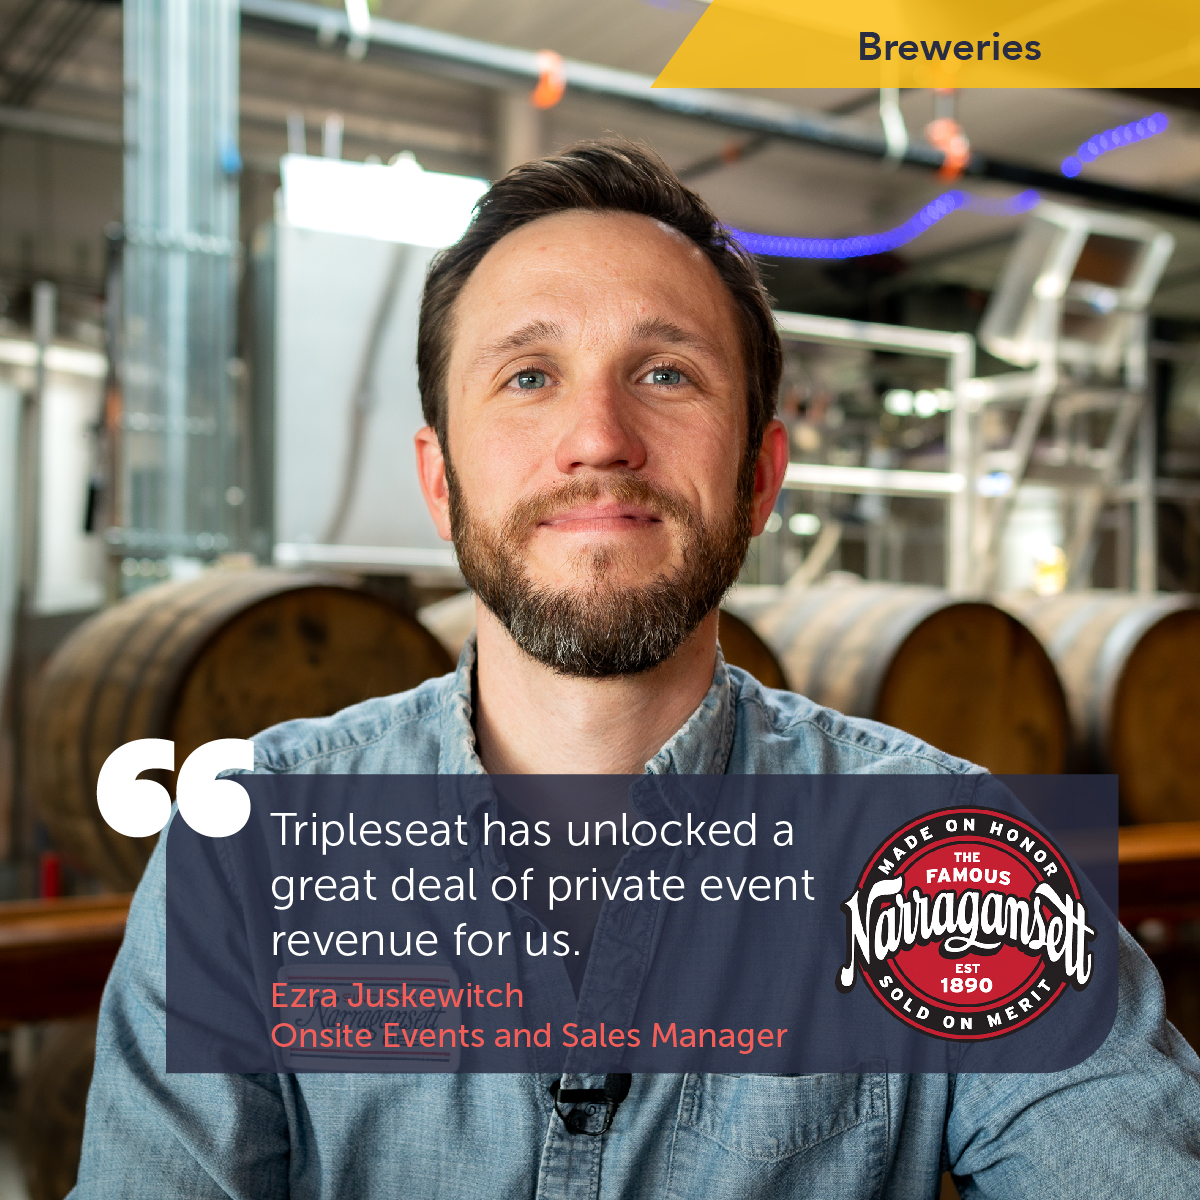 Tripleseat has helped #NarragansettBrewingCompany improve its event management processes, therefore unlocking a great deal of private event business. Check out the full case study highlighting Narragansett's Tripleseat experience at the link below. bit.ly/3tjeti5